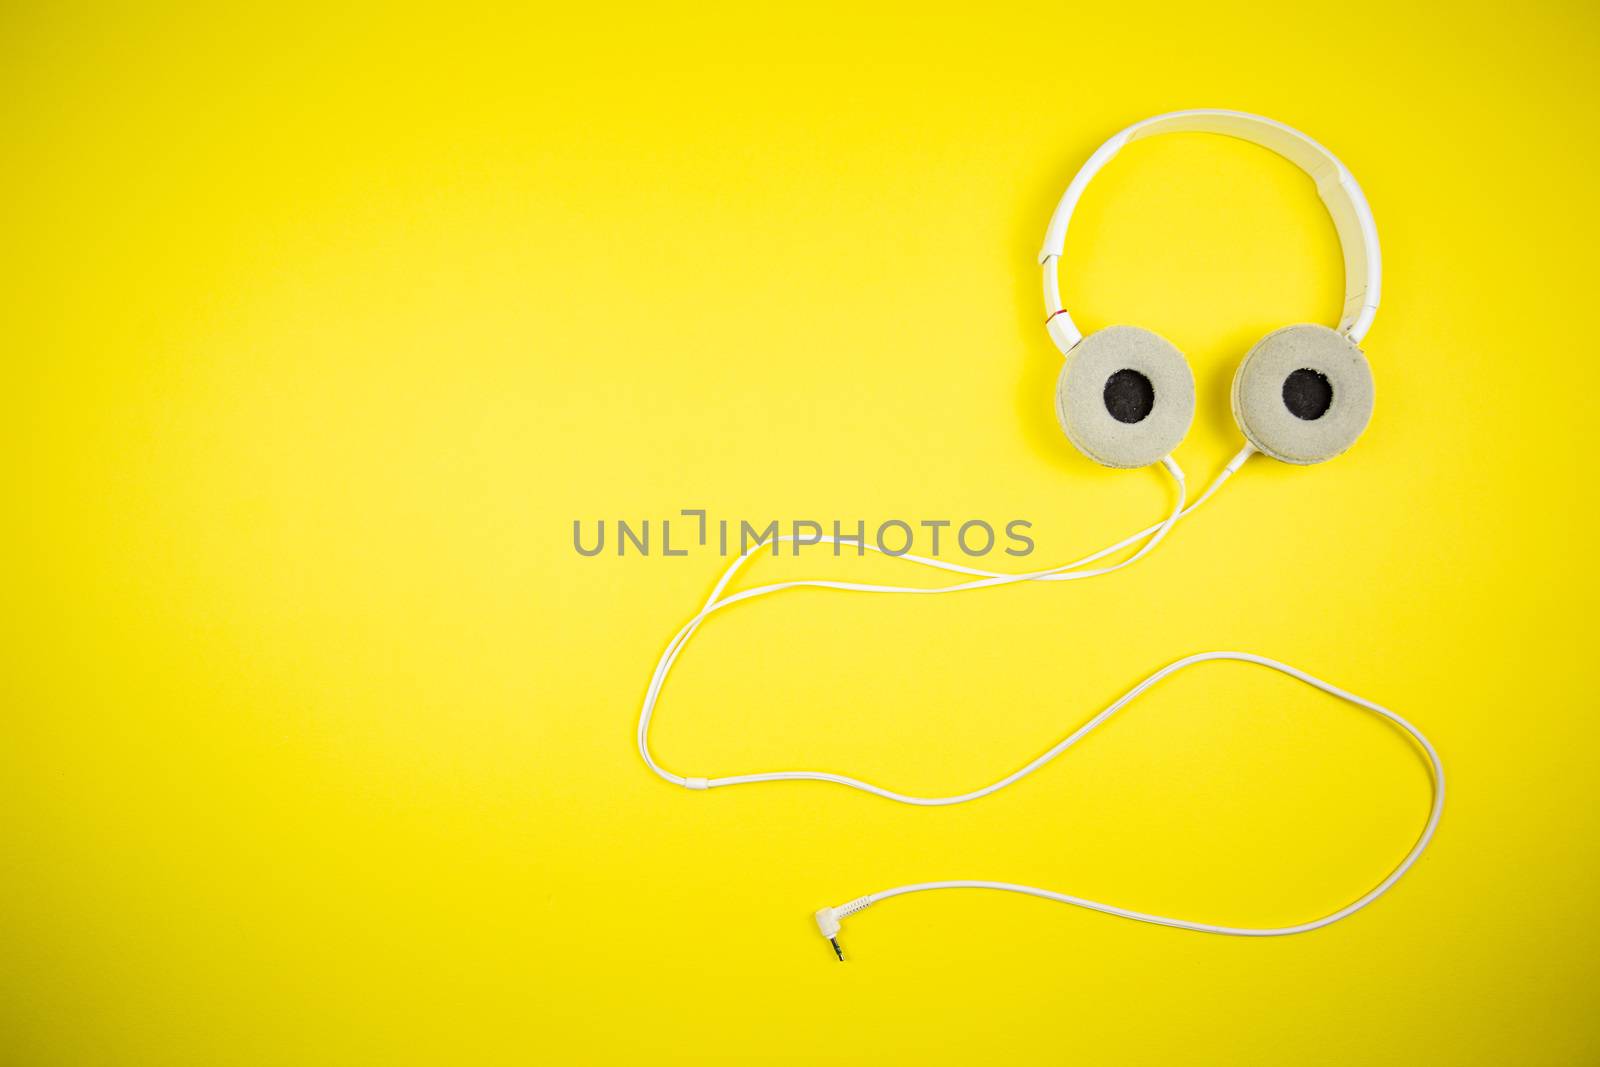 White audio headphones with a 3.5 mm wire on a yellow background, music